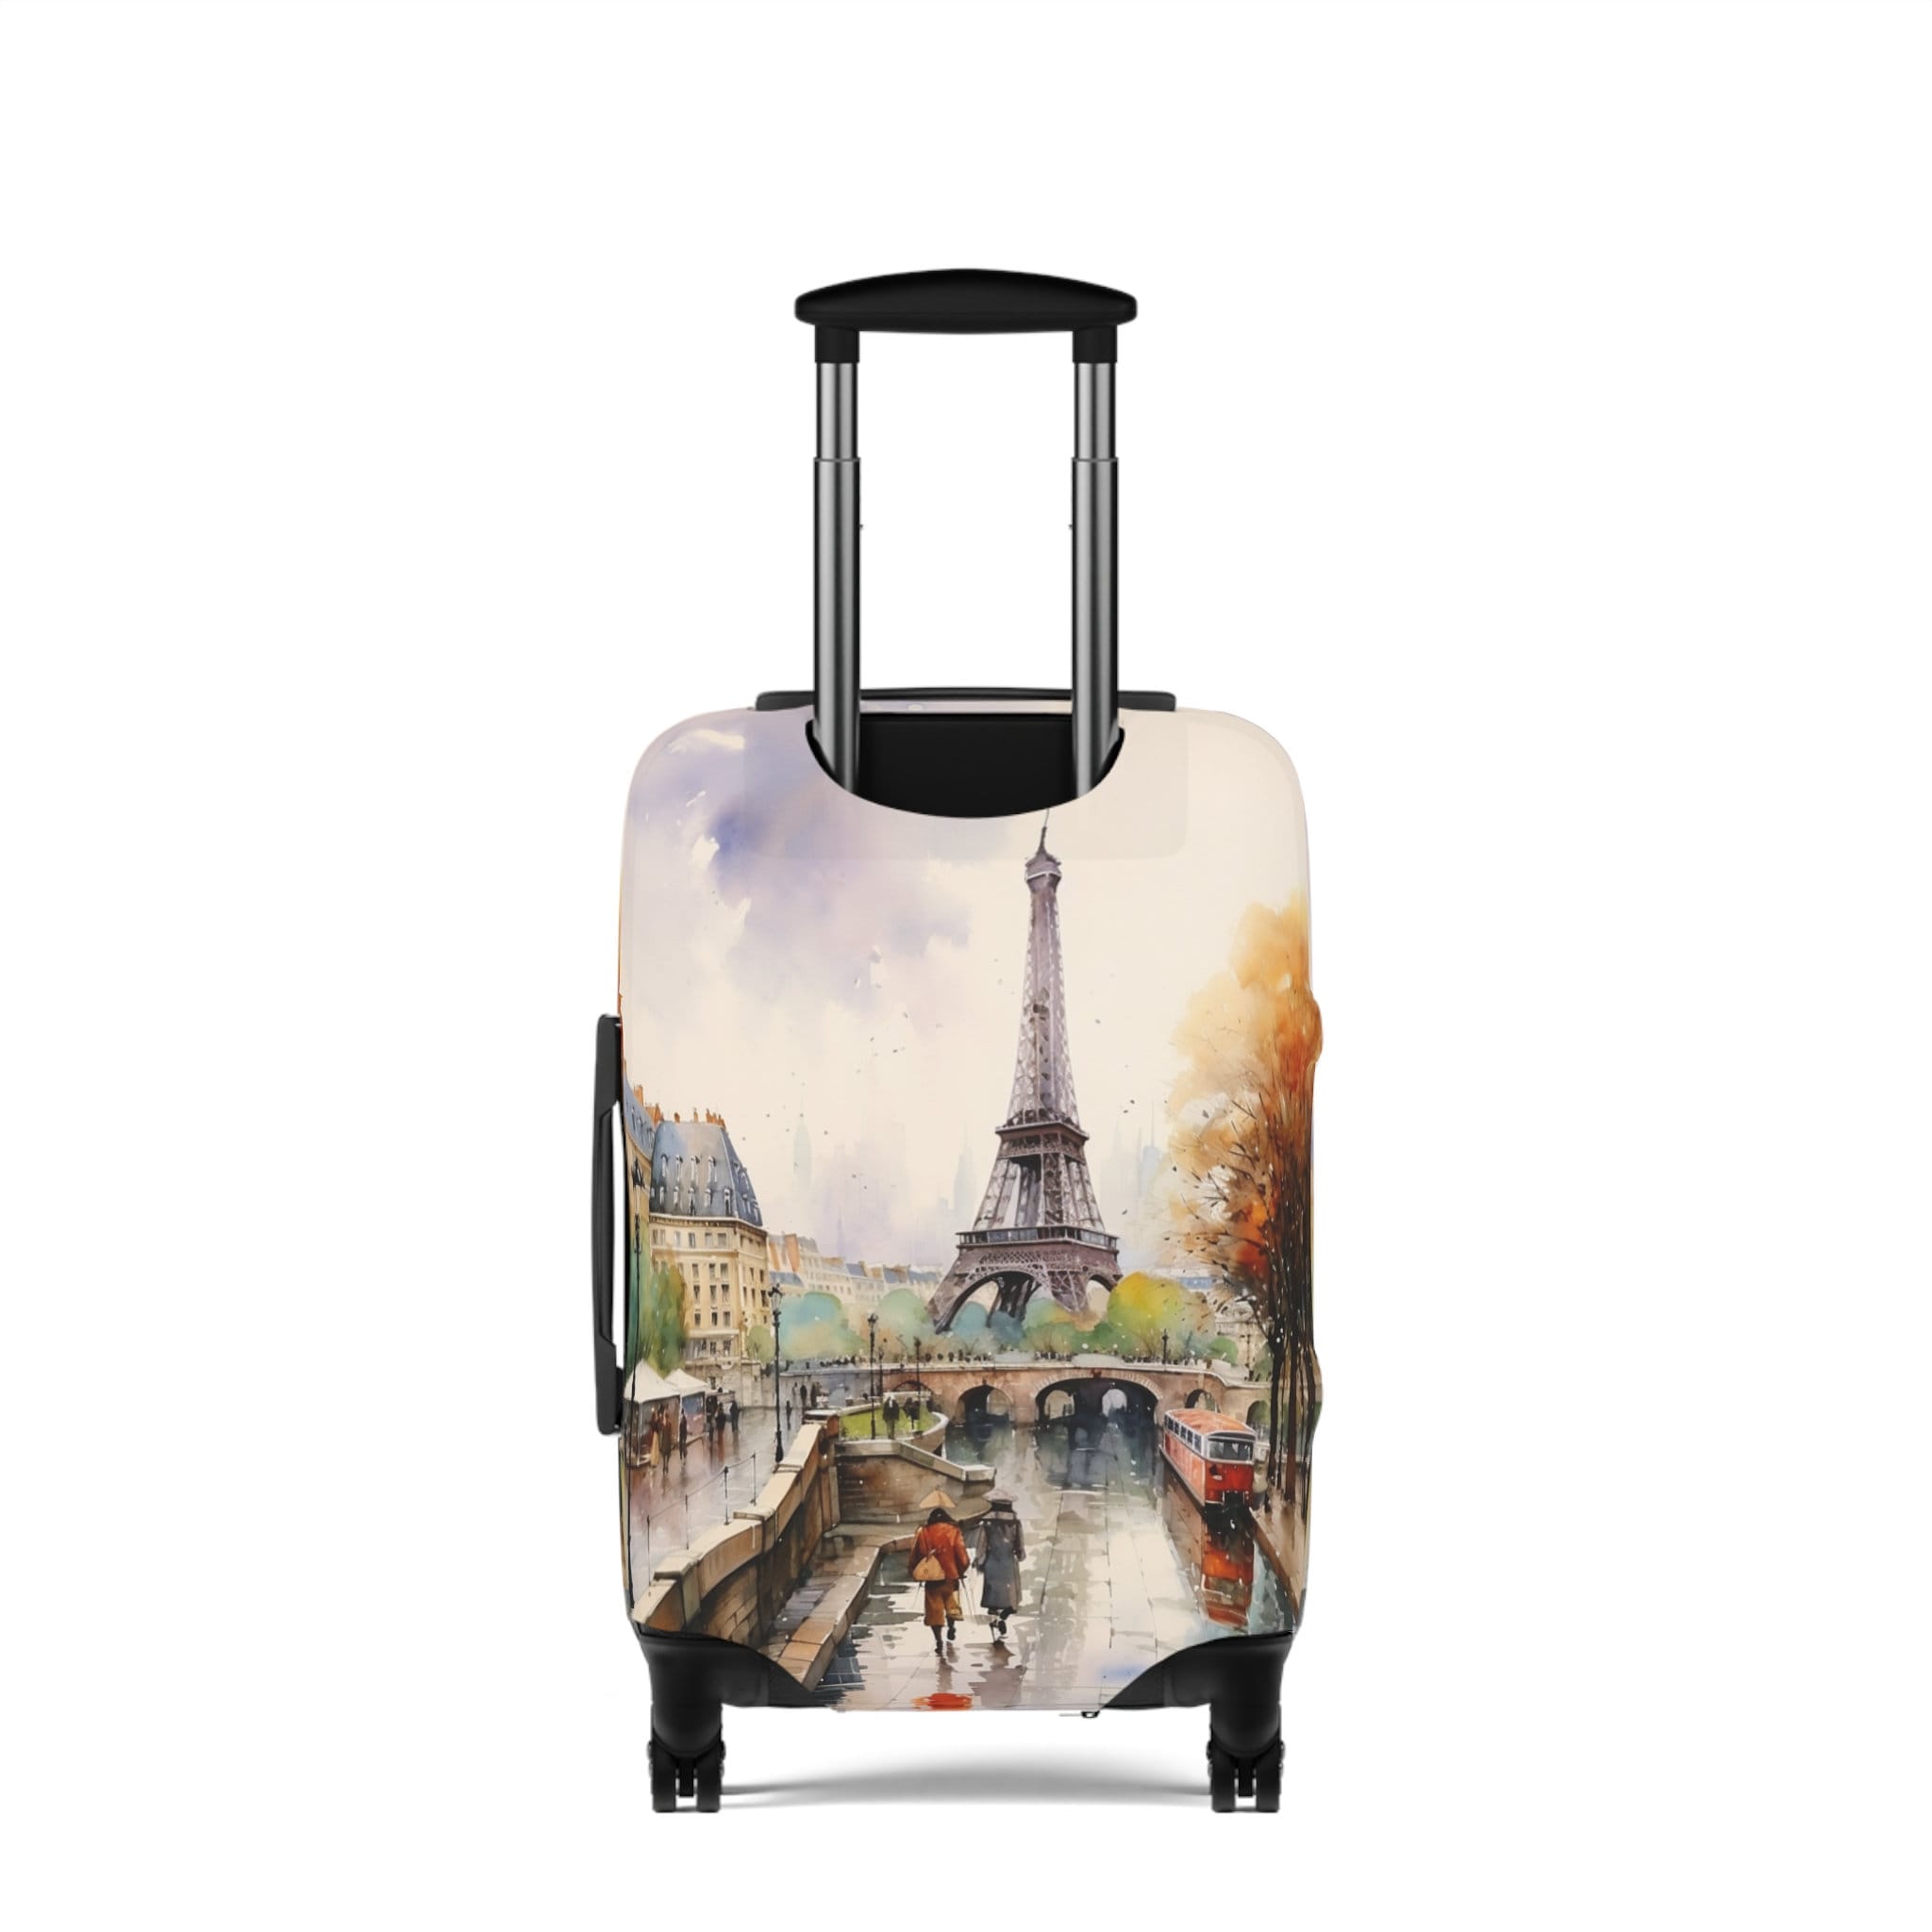 Paris art suitcase cover, Luggage Cover ,suitcase protector, water color art print, travel accessories